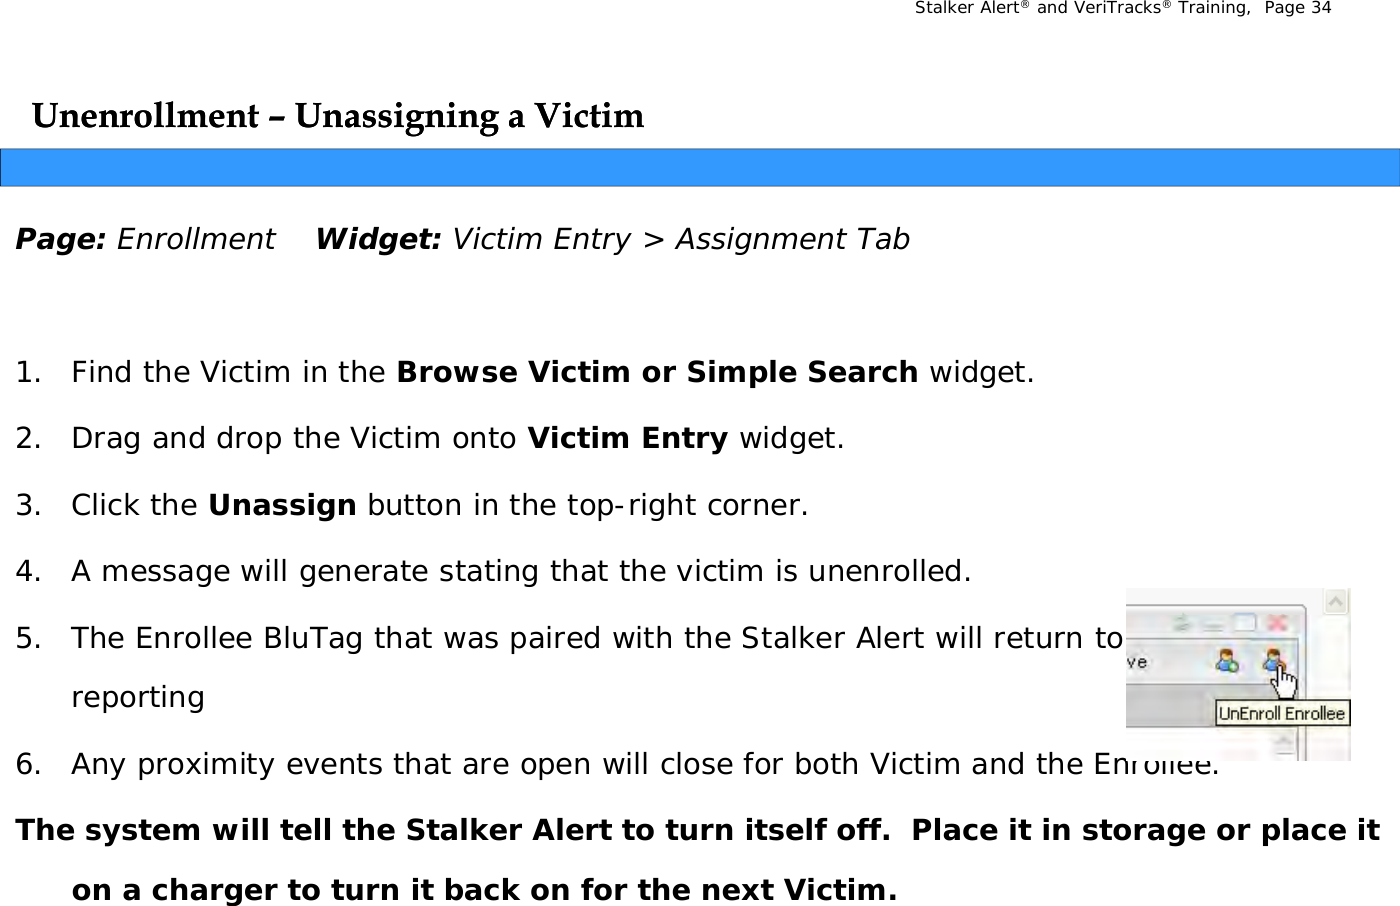 Stalker Alert®and VeriTracks®Training,  Page 34Unenrollment Unenrollment –– Unassigning a VictimUnassigning a VictimggggPage: Enrollment Widget: Victim Entry &gt; Assignment Tab1. Find the Victim in the Browse Victim or Simple Search widget.2. Drag and drop the Victim onto Victim Entry widget. 3. Click the Unassign button in the top-right corner.4. A message will generate stating that the victim is unenrolled. 5. The Enrollee BluTag that was paired with the Stalker Alert will return to 10 minute reporting6. Any proximity events that are open will close for both Victim and the Enrollee. yp y pThe system will tell the Stalker Alert to turn itself off.  Place it in storage or place it on a charger to turn it back on for the next Victim.